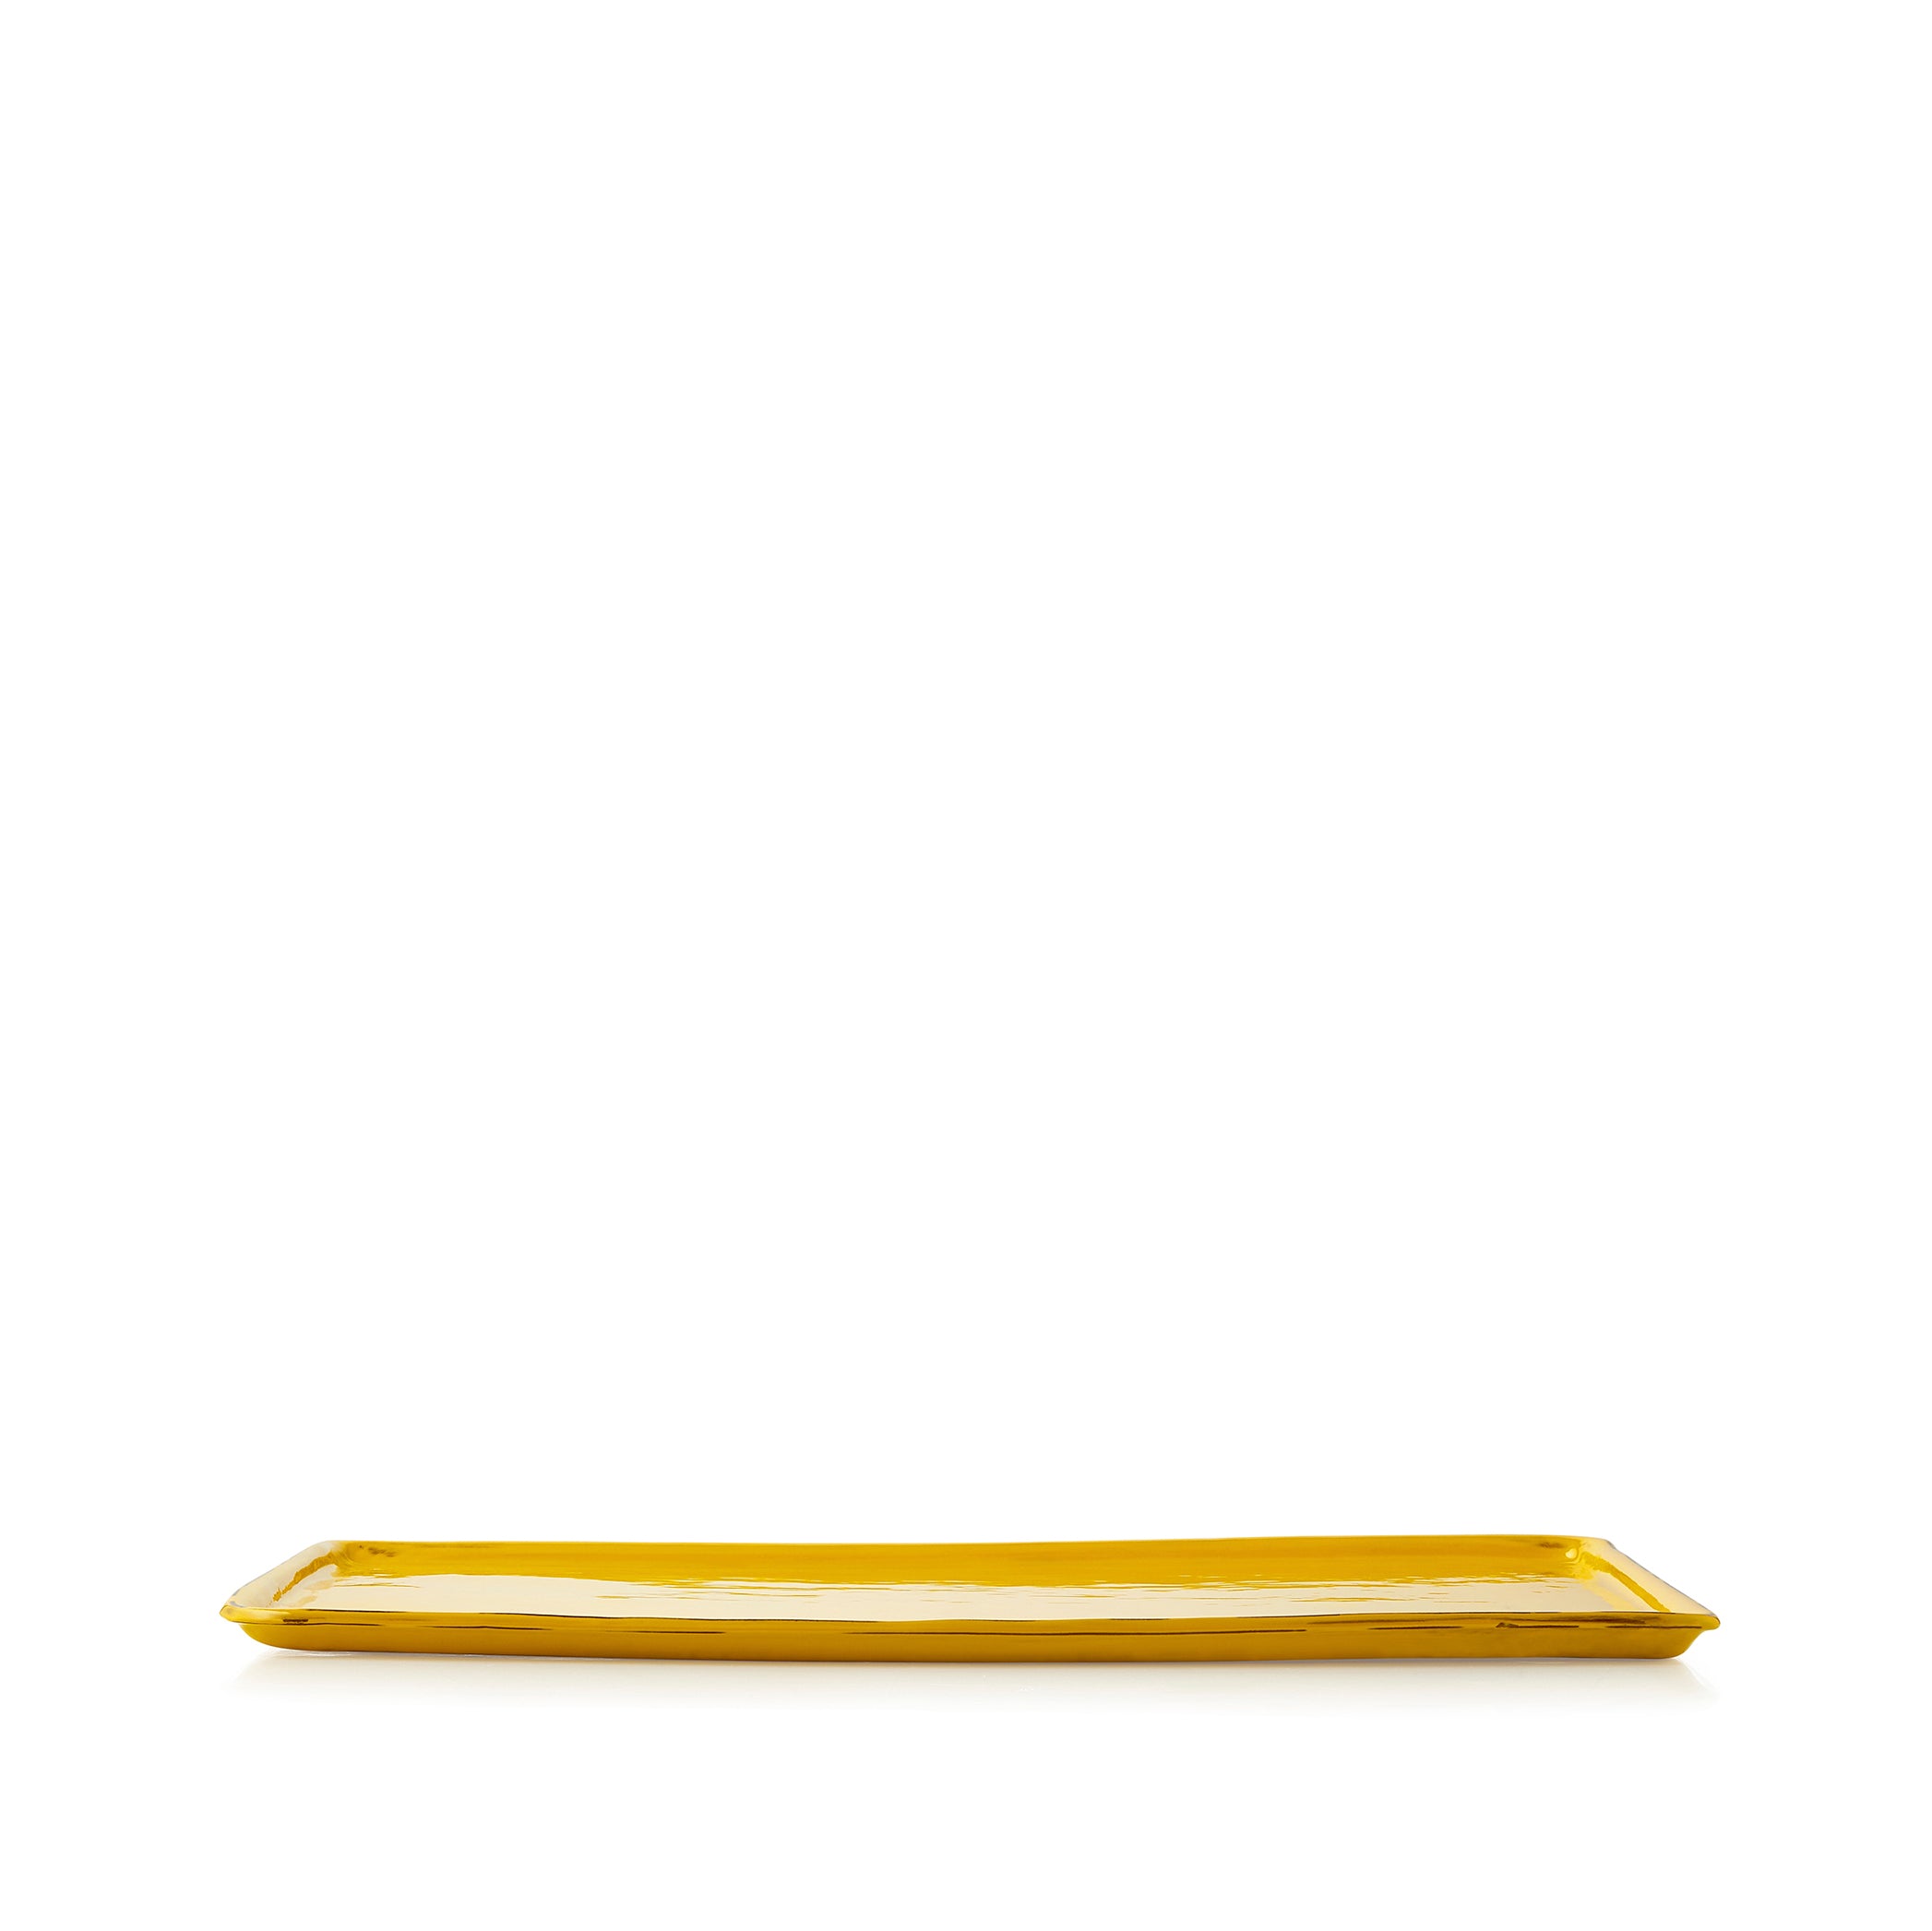 Ceramic Serving Tray in Yellow